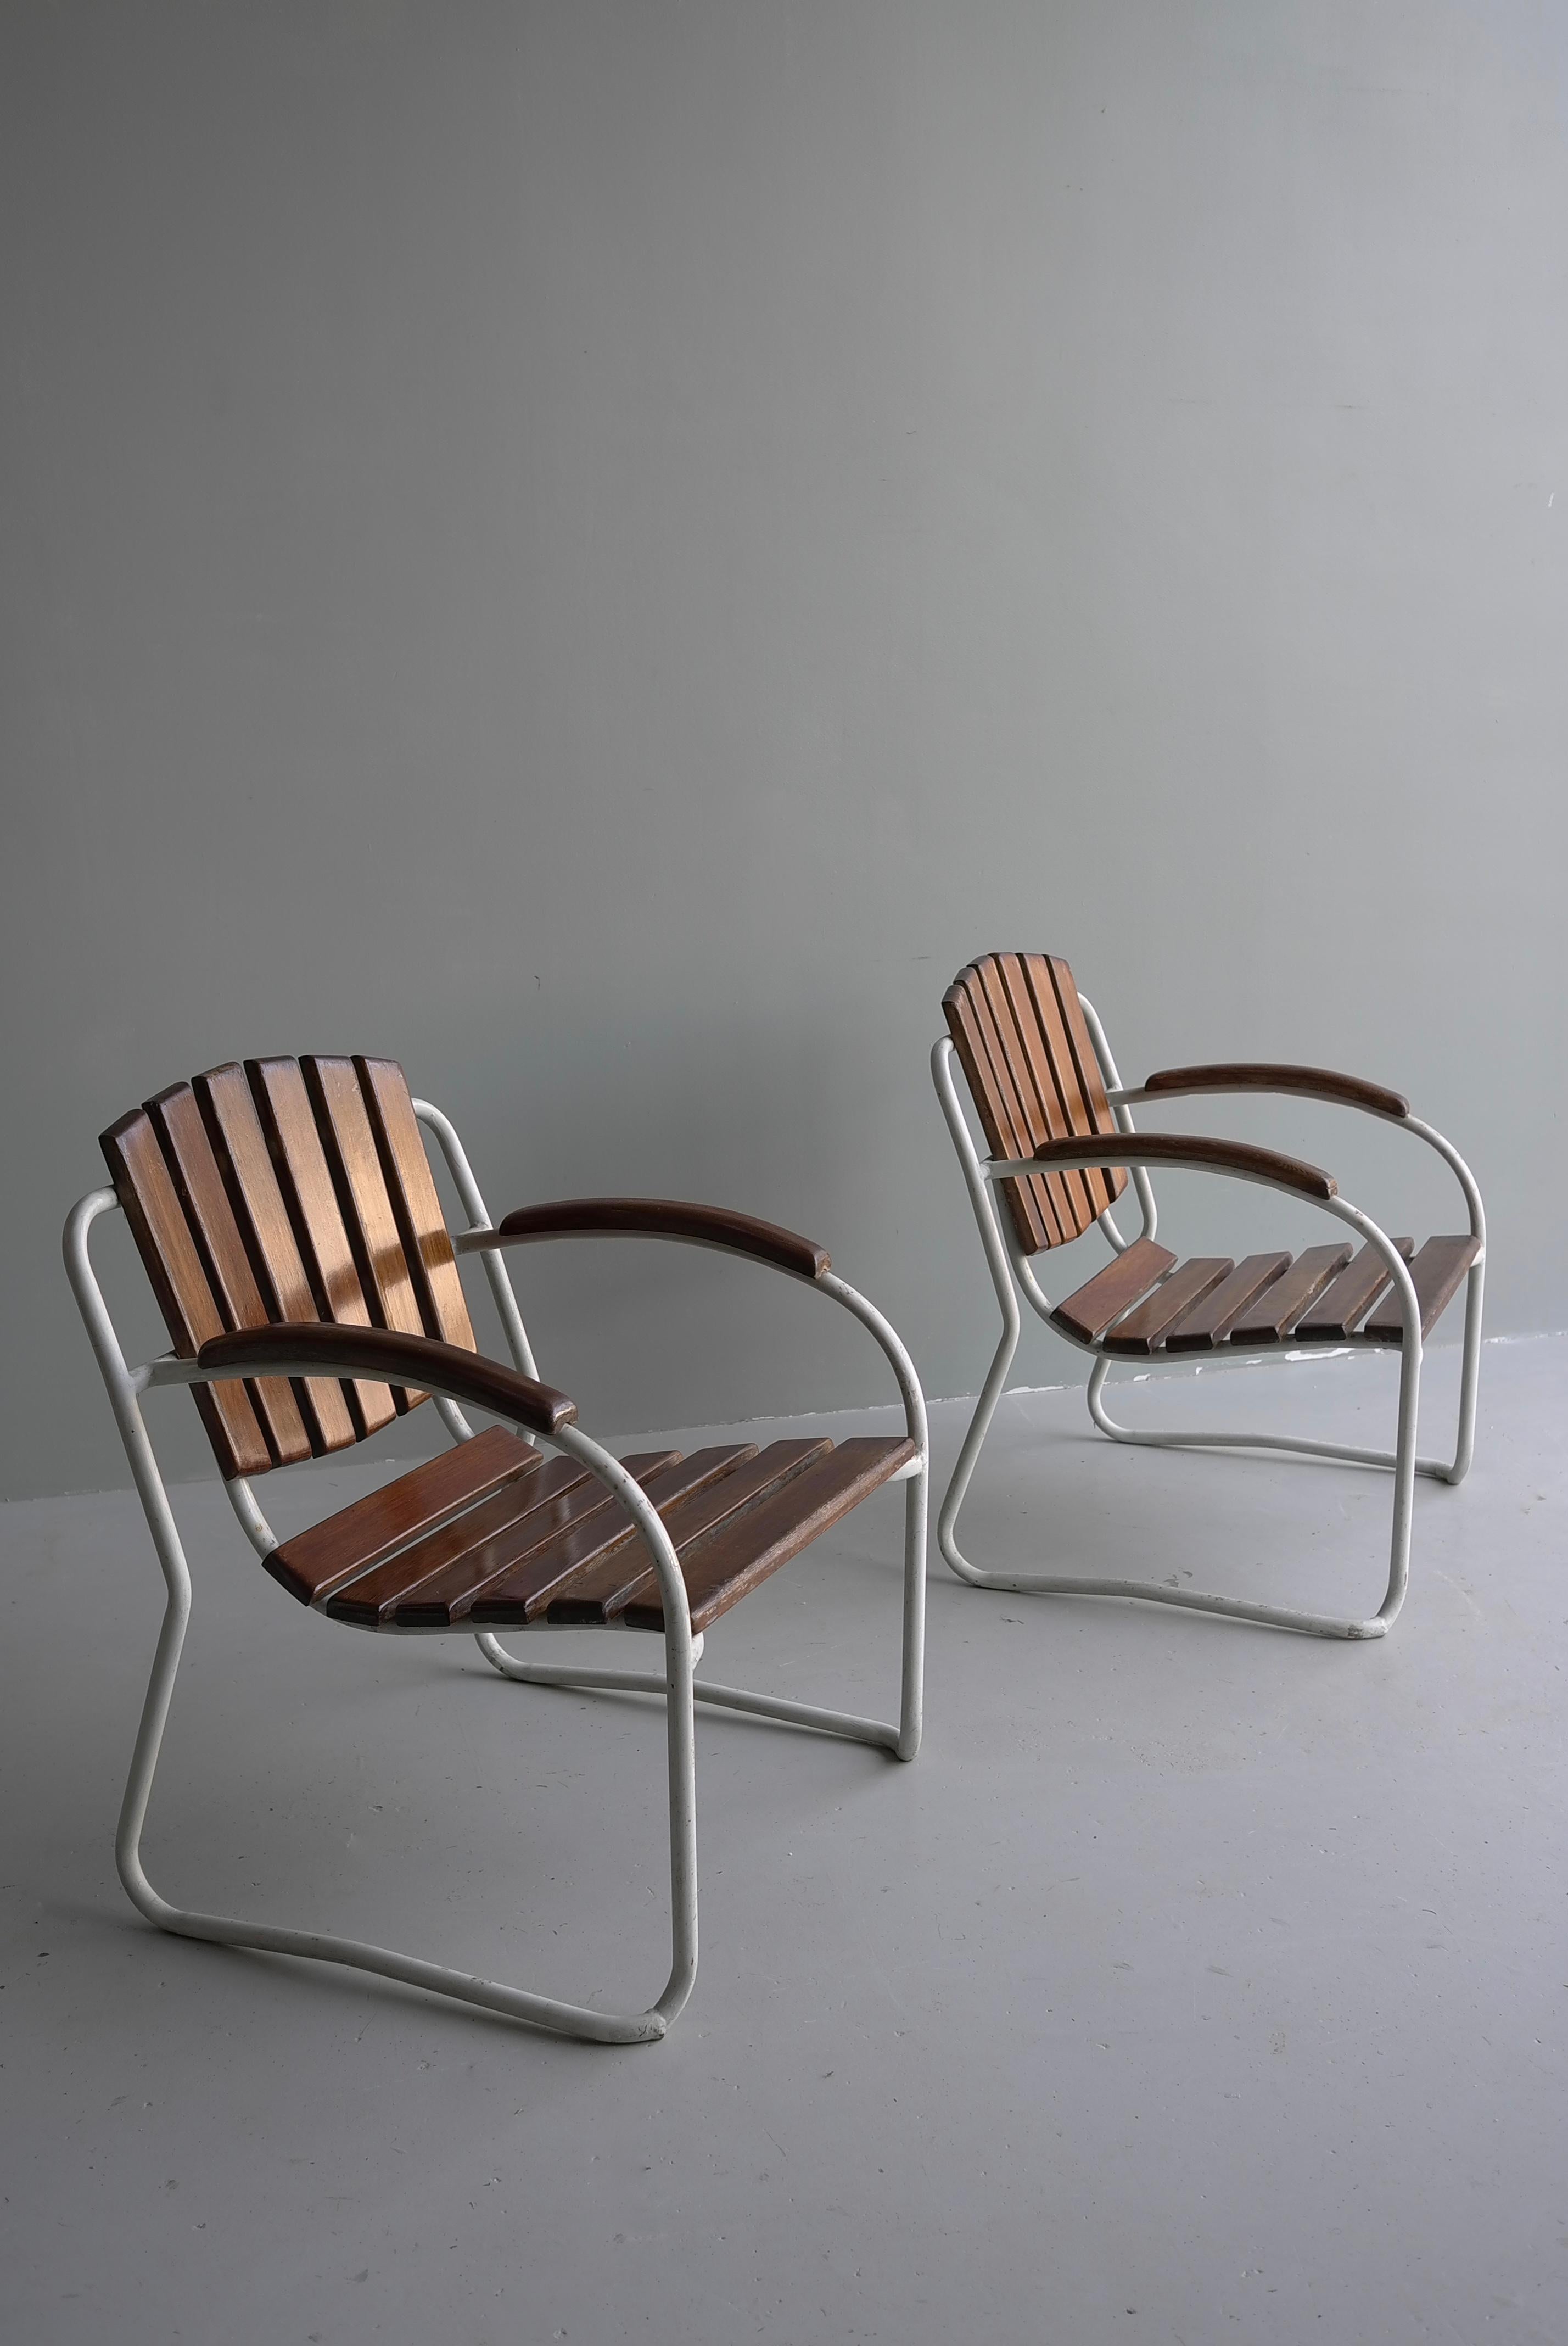 1930's metal lawn chairs